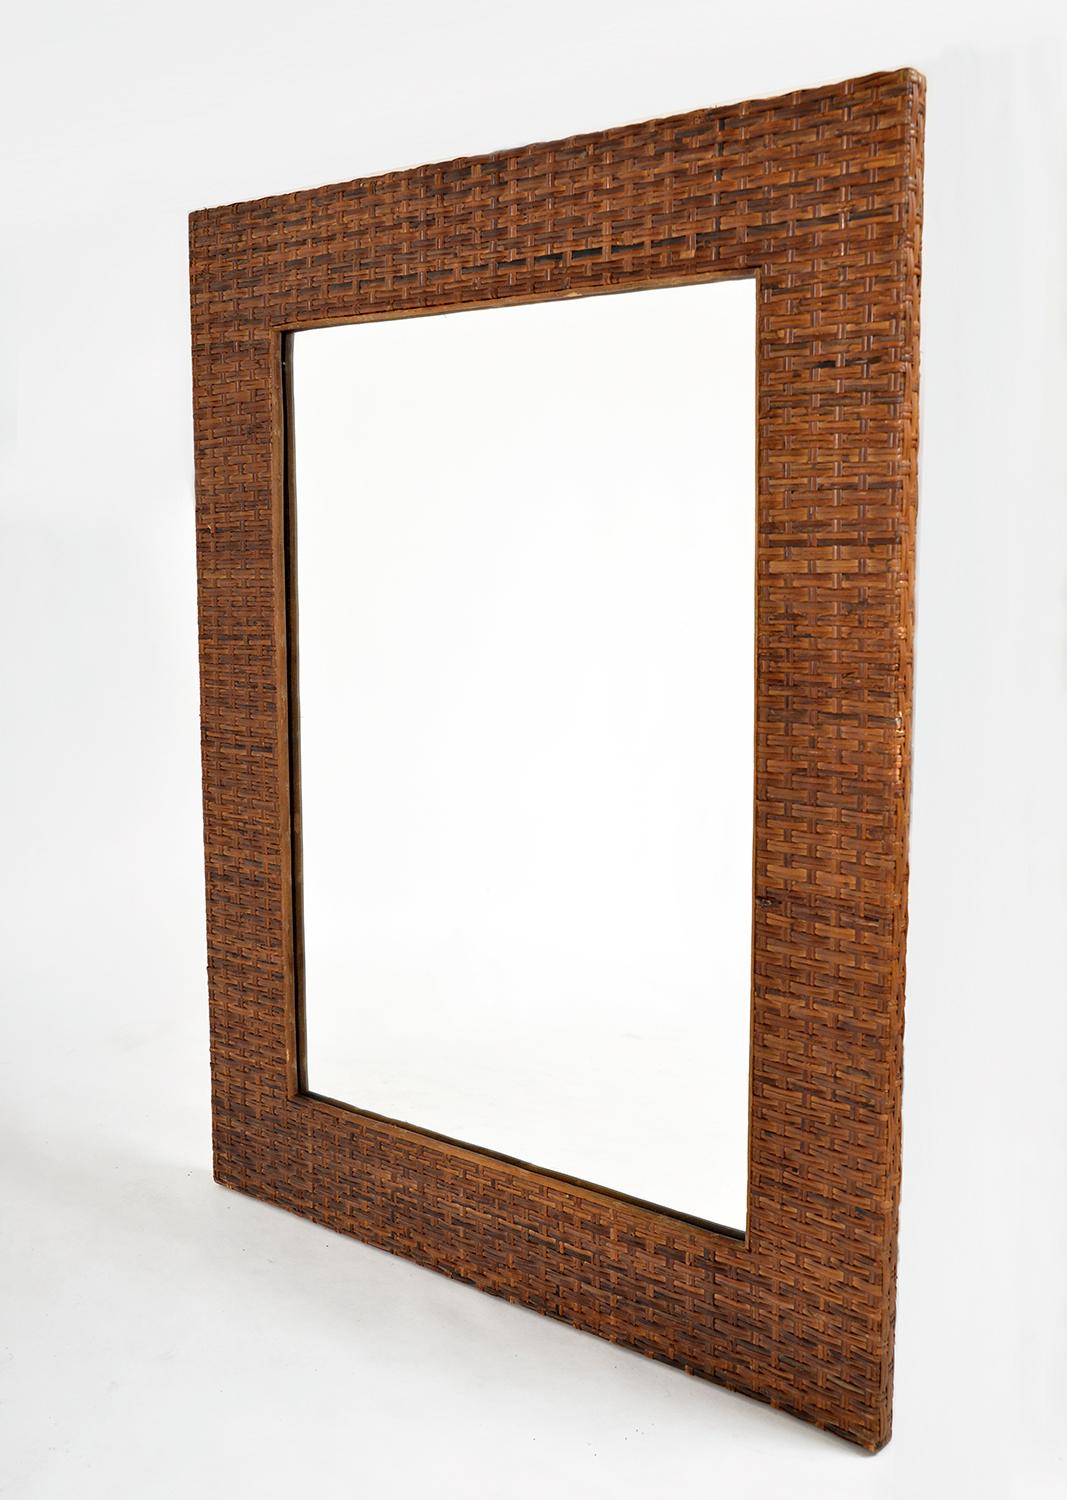 This incredibly stylish 1970s rectangular wall mirror has the richest of colours, the wide frame made from wicker woven split cane with an inner bamboo frame around the mirror. Measuring over 3 feet tall, this impressive mirror has a 13cm deep